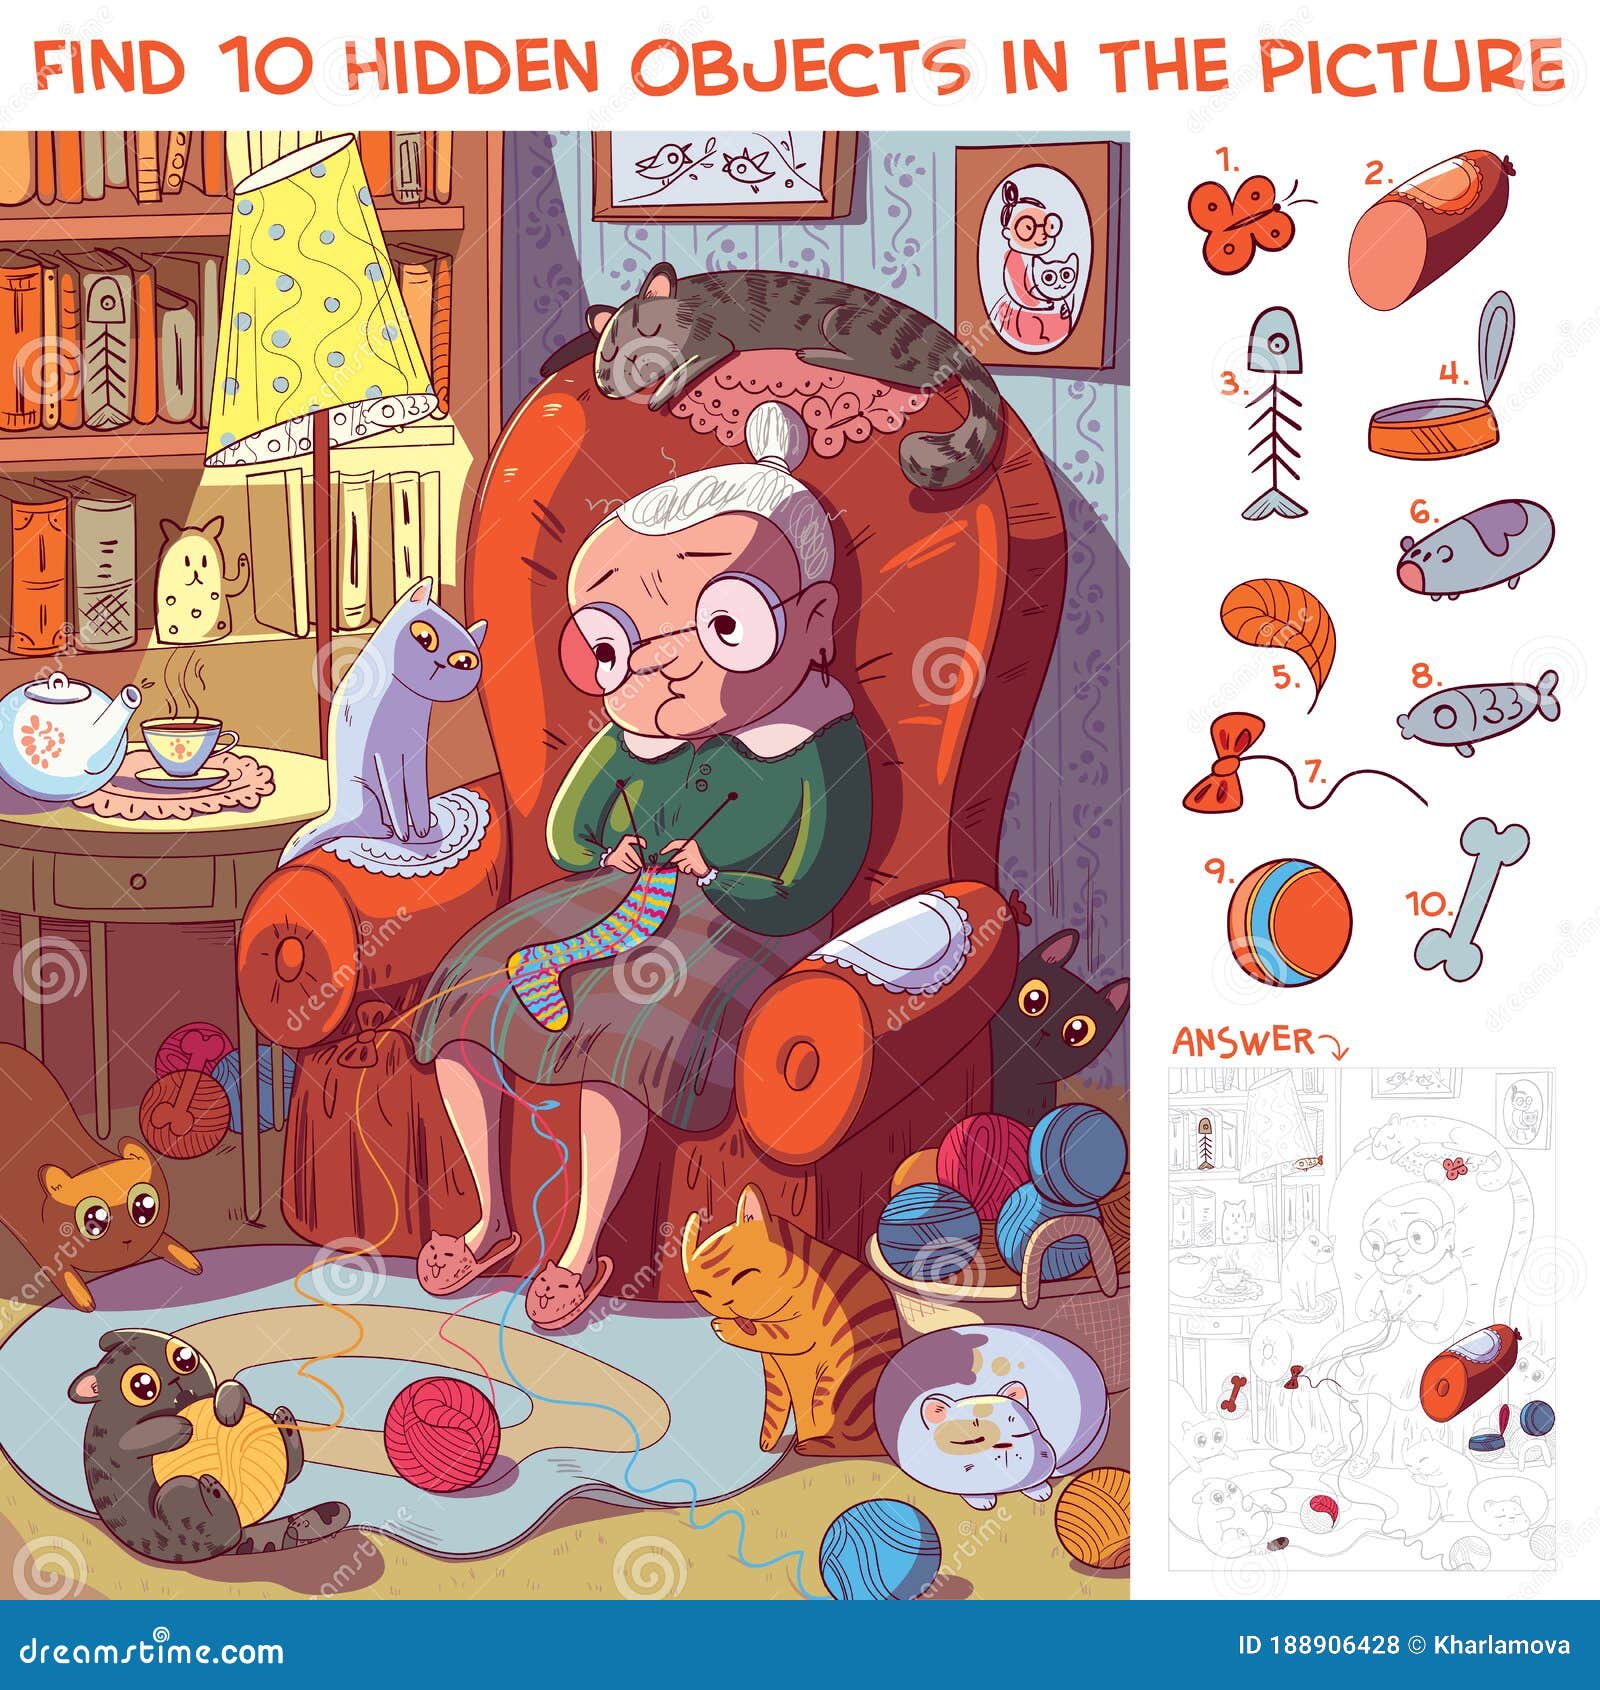 grandmother sitting on the armchair and knits socks surrounded by her cats. find hidden objects